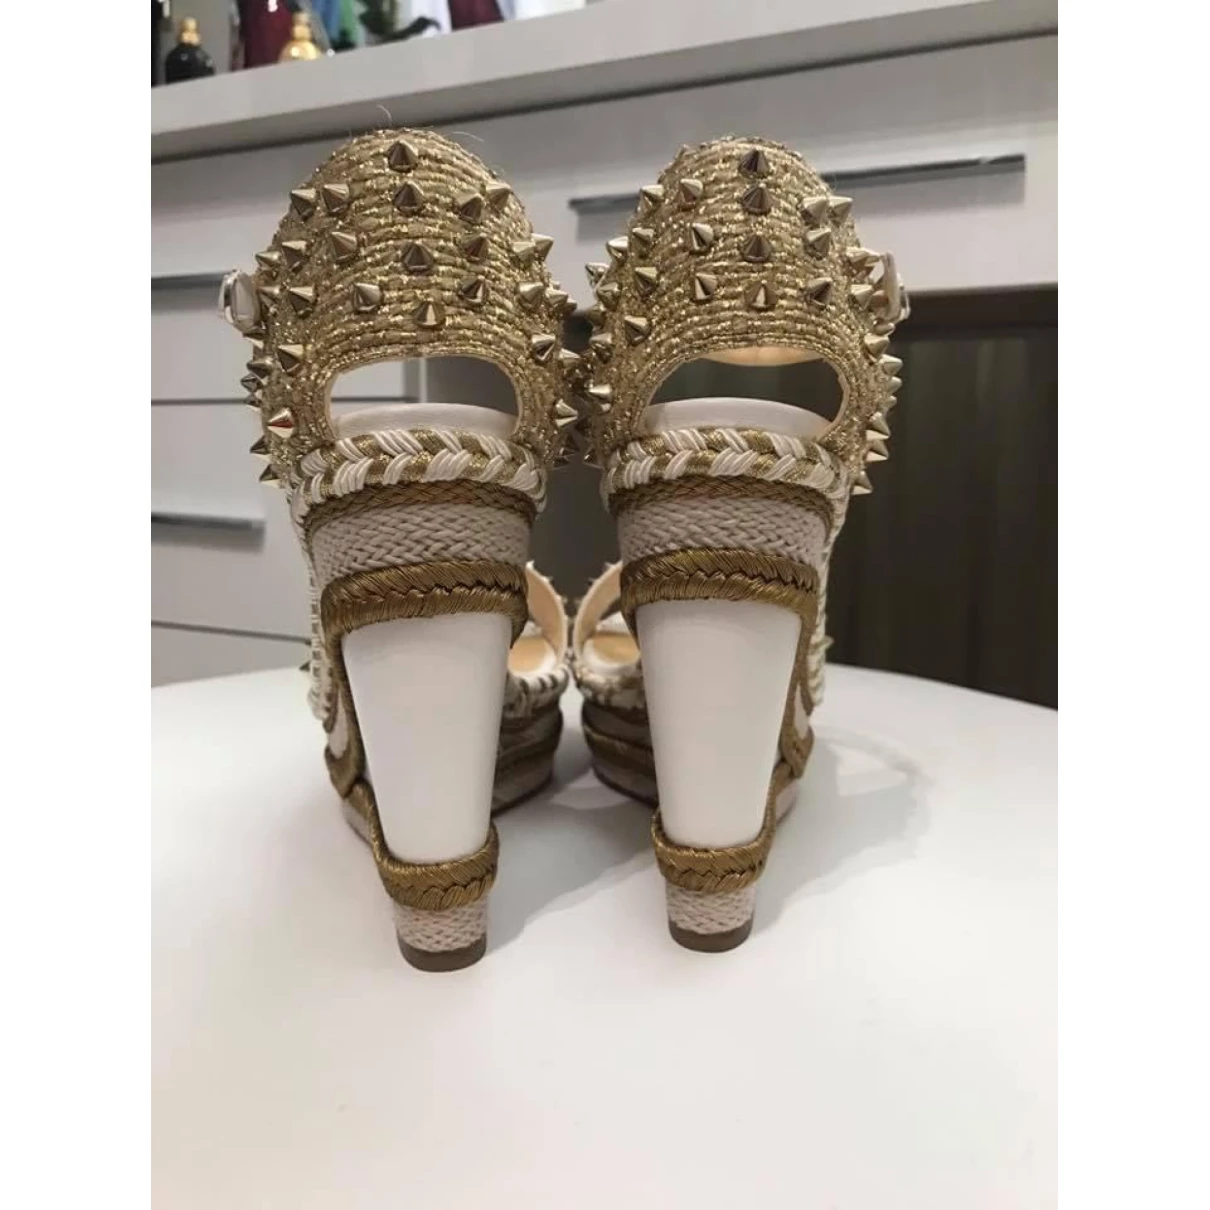 Pre-owned Christian Louboutin Leather Sandals In White